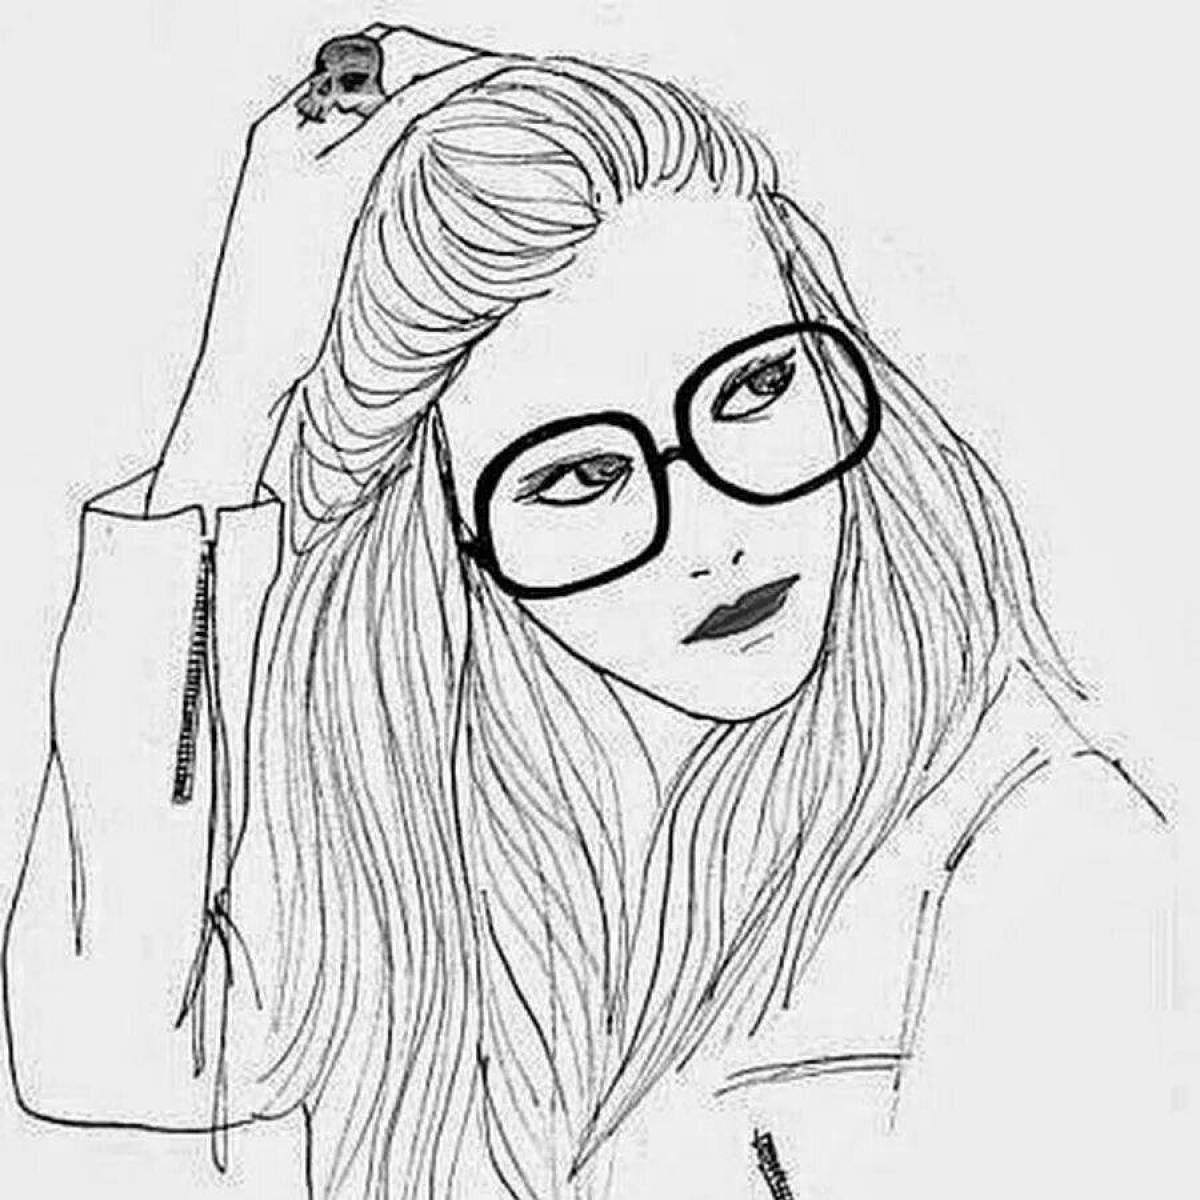 Delightful coloring book girl with glasses